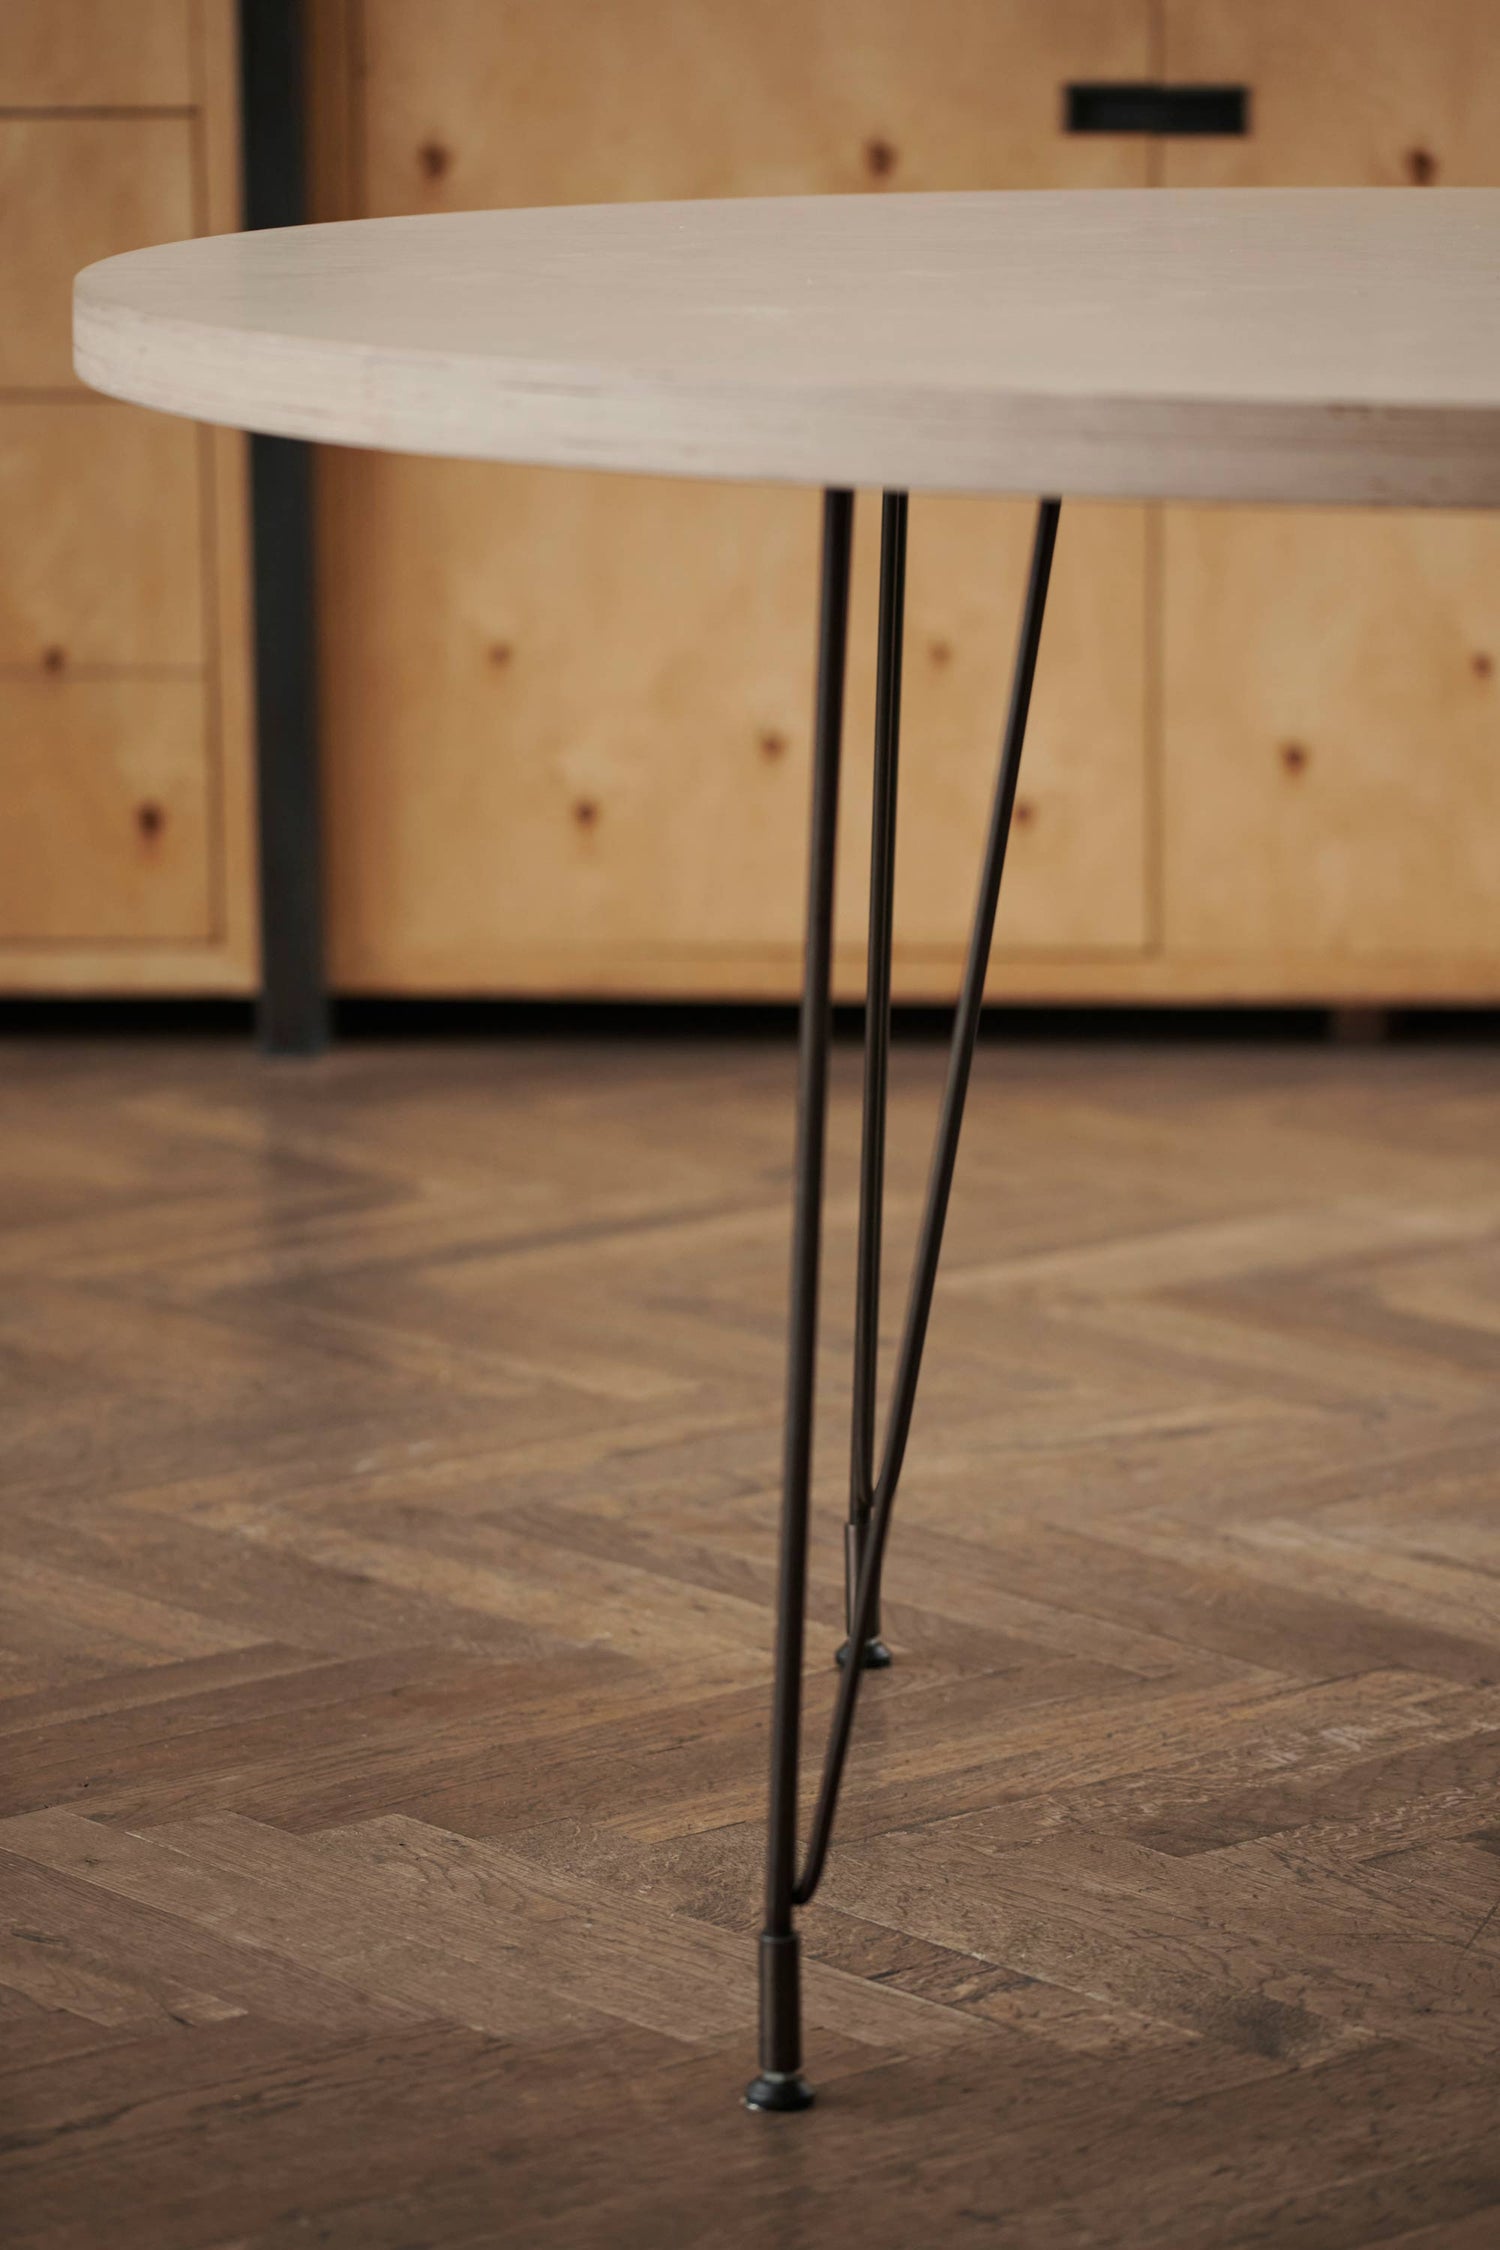 Detail shot of the thin mat black wireframe table legs from the Heerenhuis Sputnik Table.